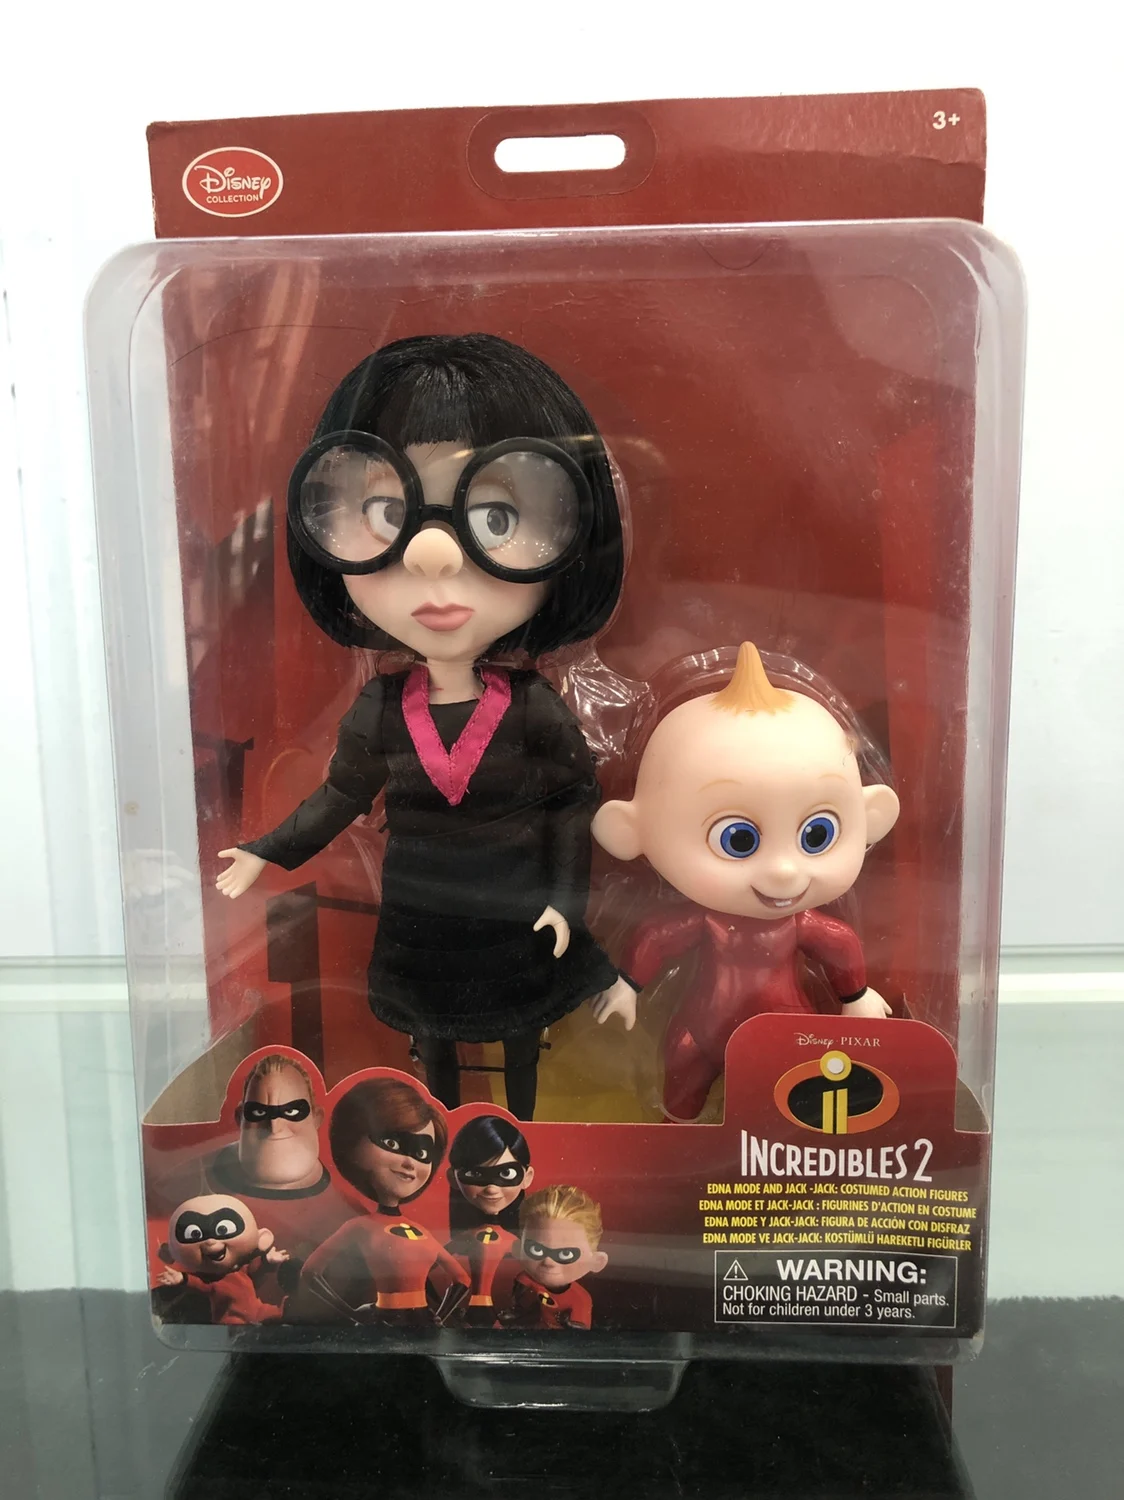 

Disney The Incredibles 2 Edna Mode Jack-Jack Parr Suit Figure Model Collectible Toys Children Birthday Gifts